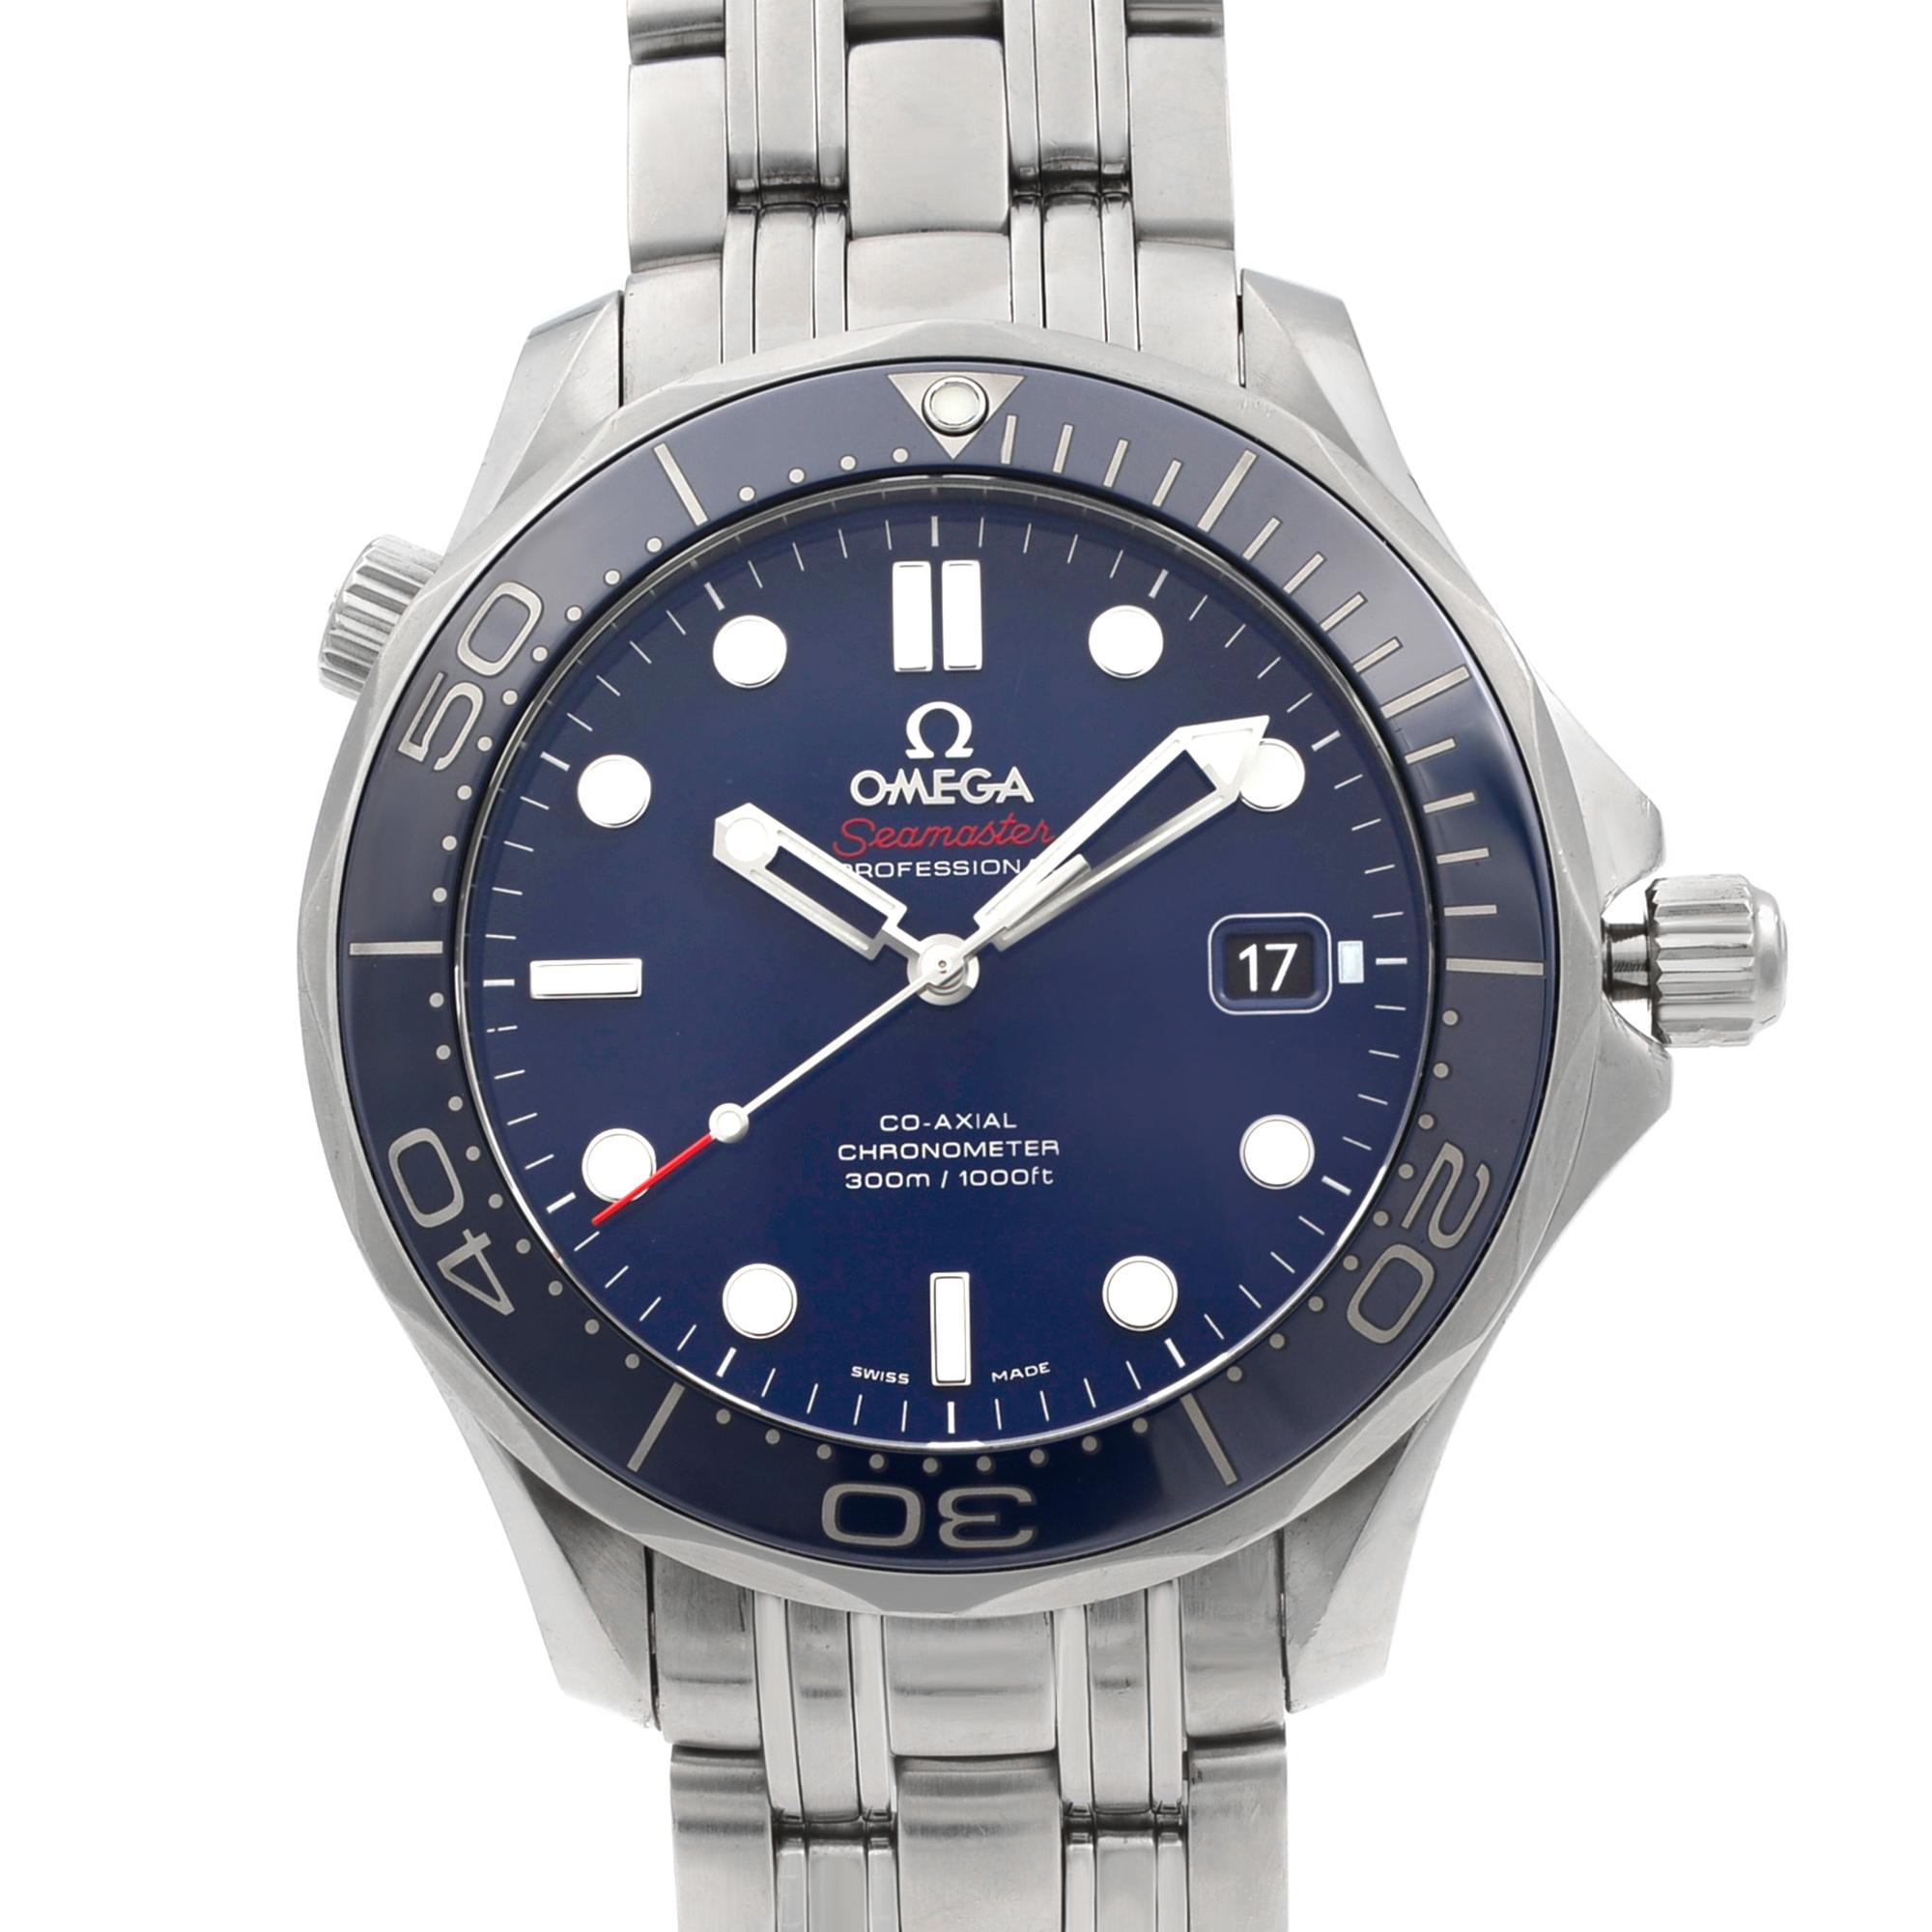 This Omega Seamaster Diver mens watch is in excellent pre owned condition. Original Box and Papers are not included comes with a Chronostore presentation box and authenticity card. Covered by a one-year Chronostore warranty.
Details:
MSRP 4400
Brand